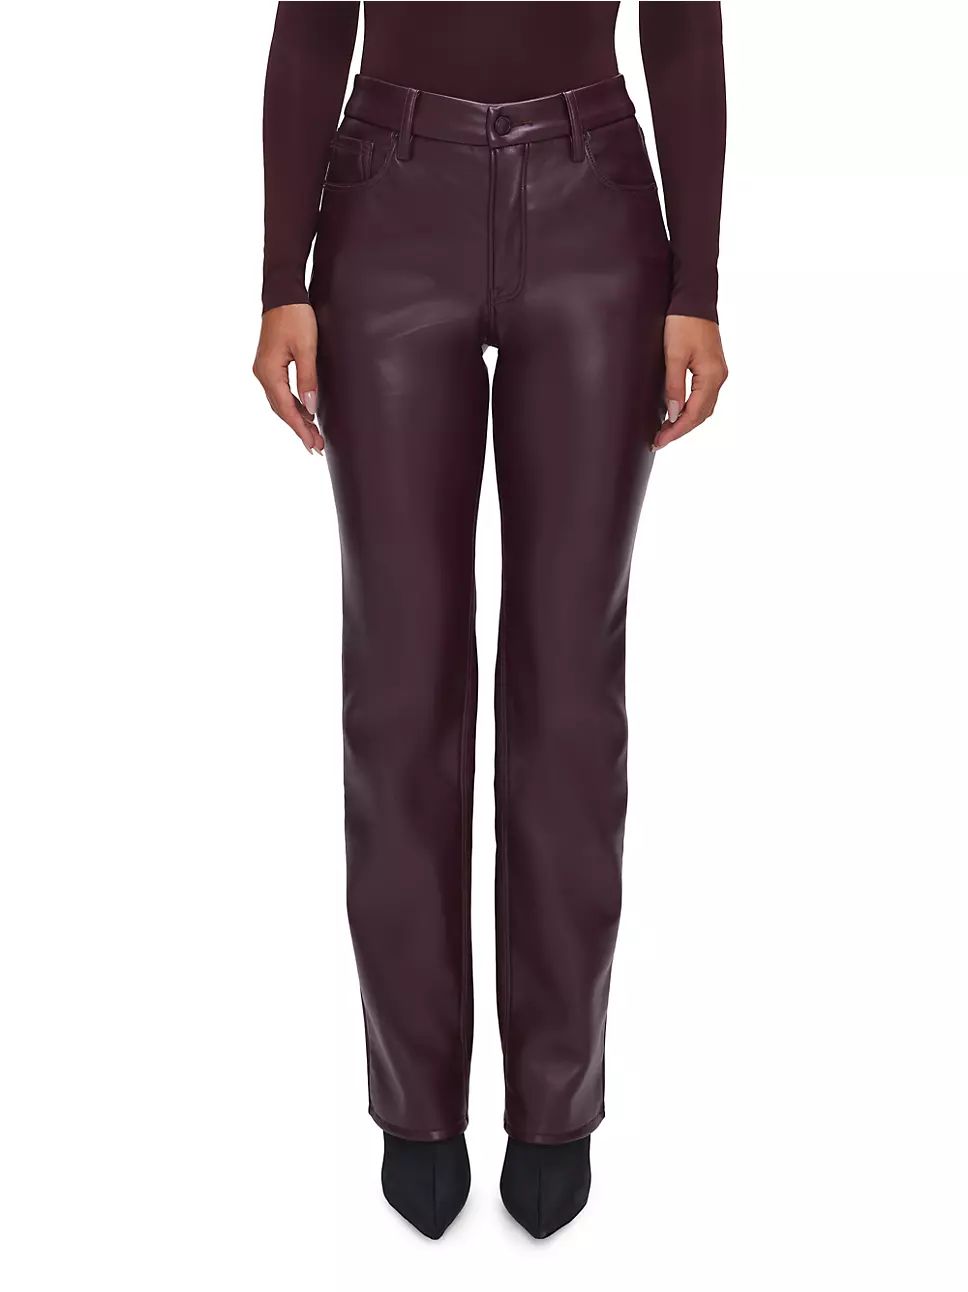 Good Icon Faux Leather Pants | Saks Fifth Avenue